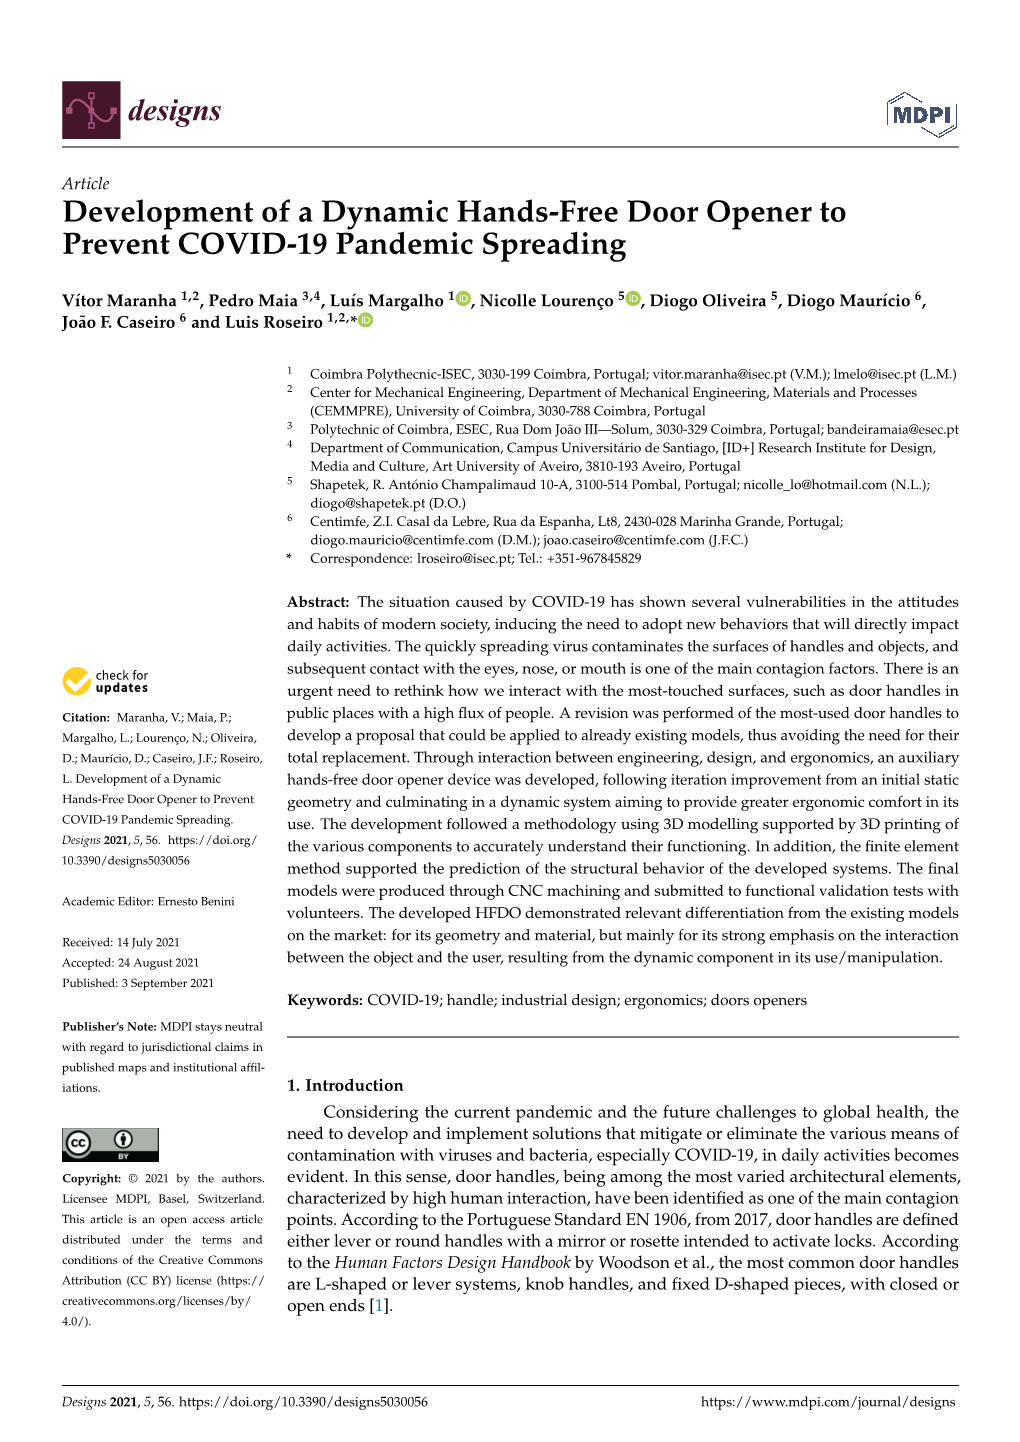 Development of a Dynamic Hands-Free Door Opener to Prevent COVID-19 Pandemic Spreading